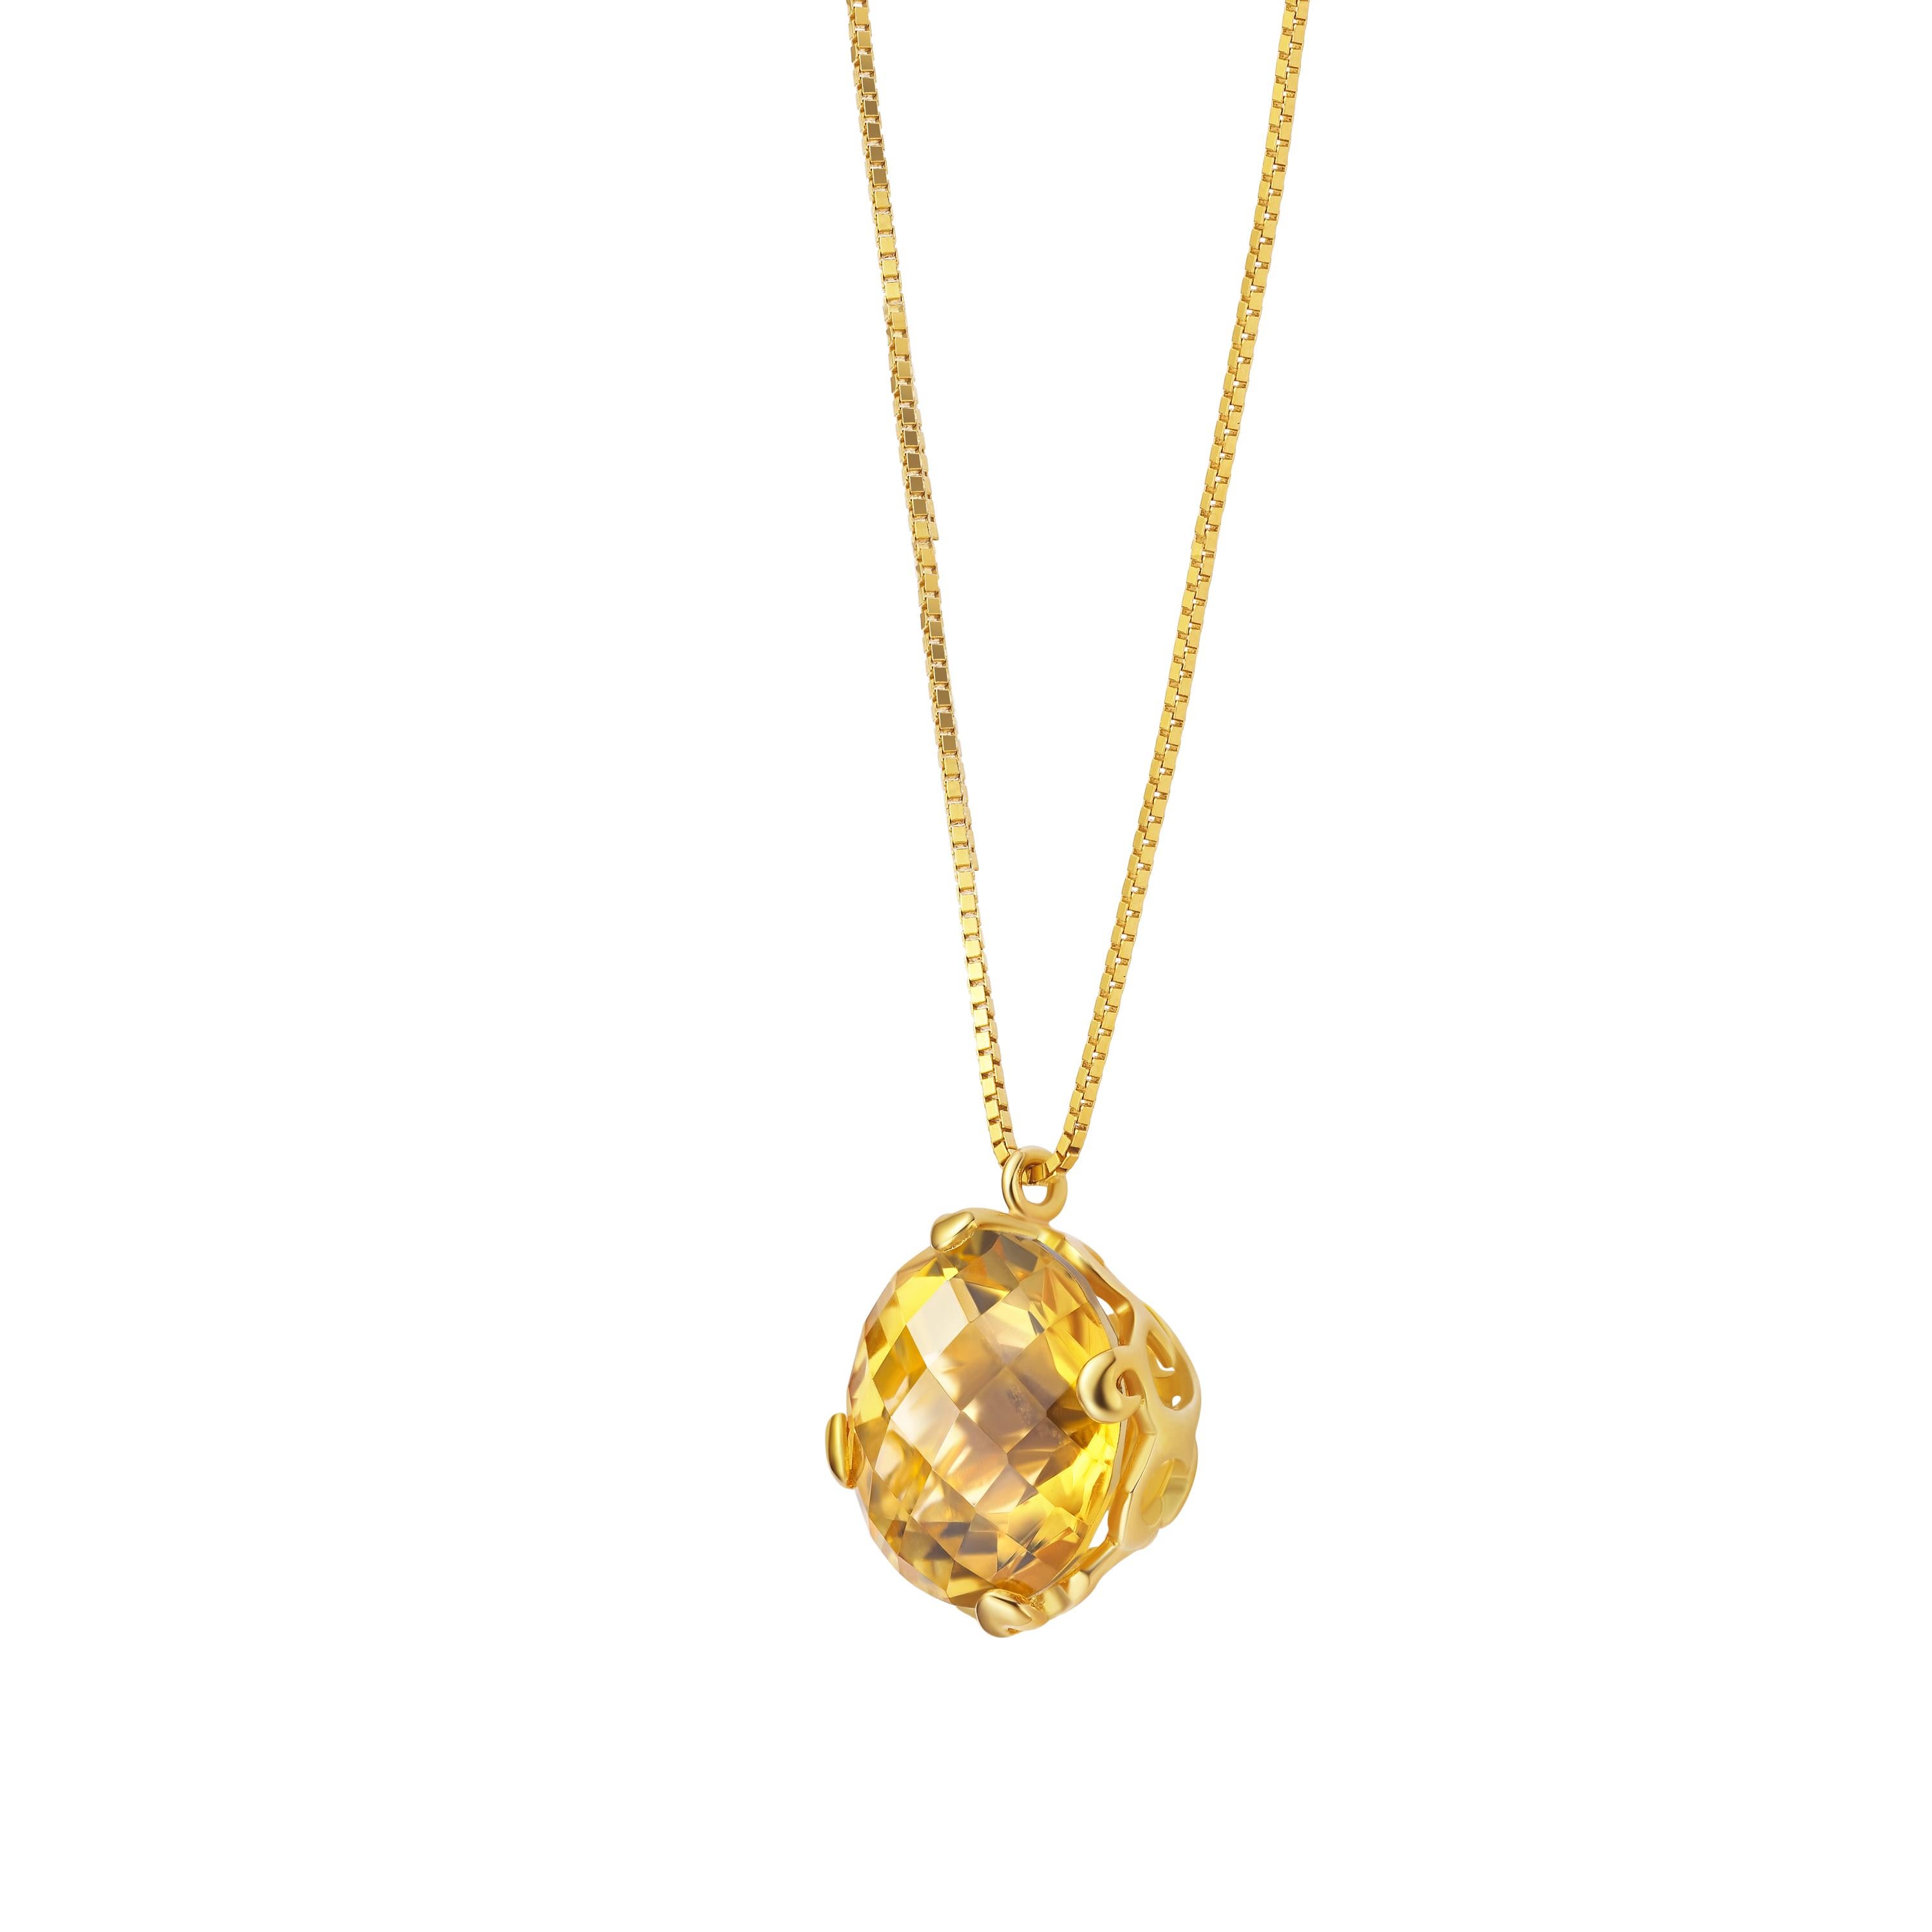 Description:
Whispering small round stone pendant with a central 2.2ct citrine set in 18ct yellow gold. Chain length is 16 inches + 1 inch extension.

Inspiration:
Emulating femininity and glamour, the Whispering collection is full of colour and